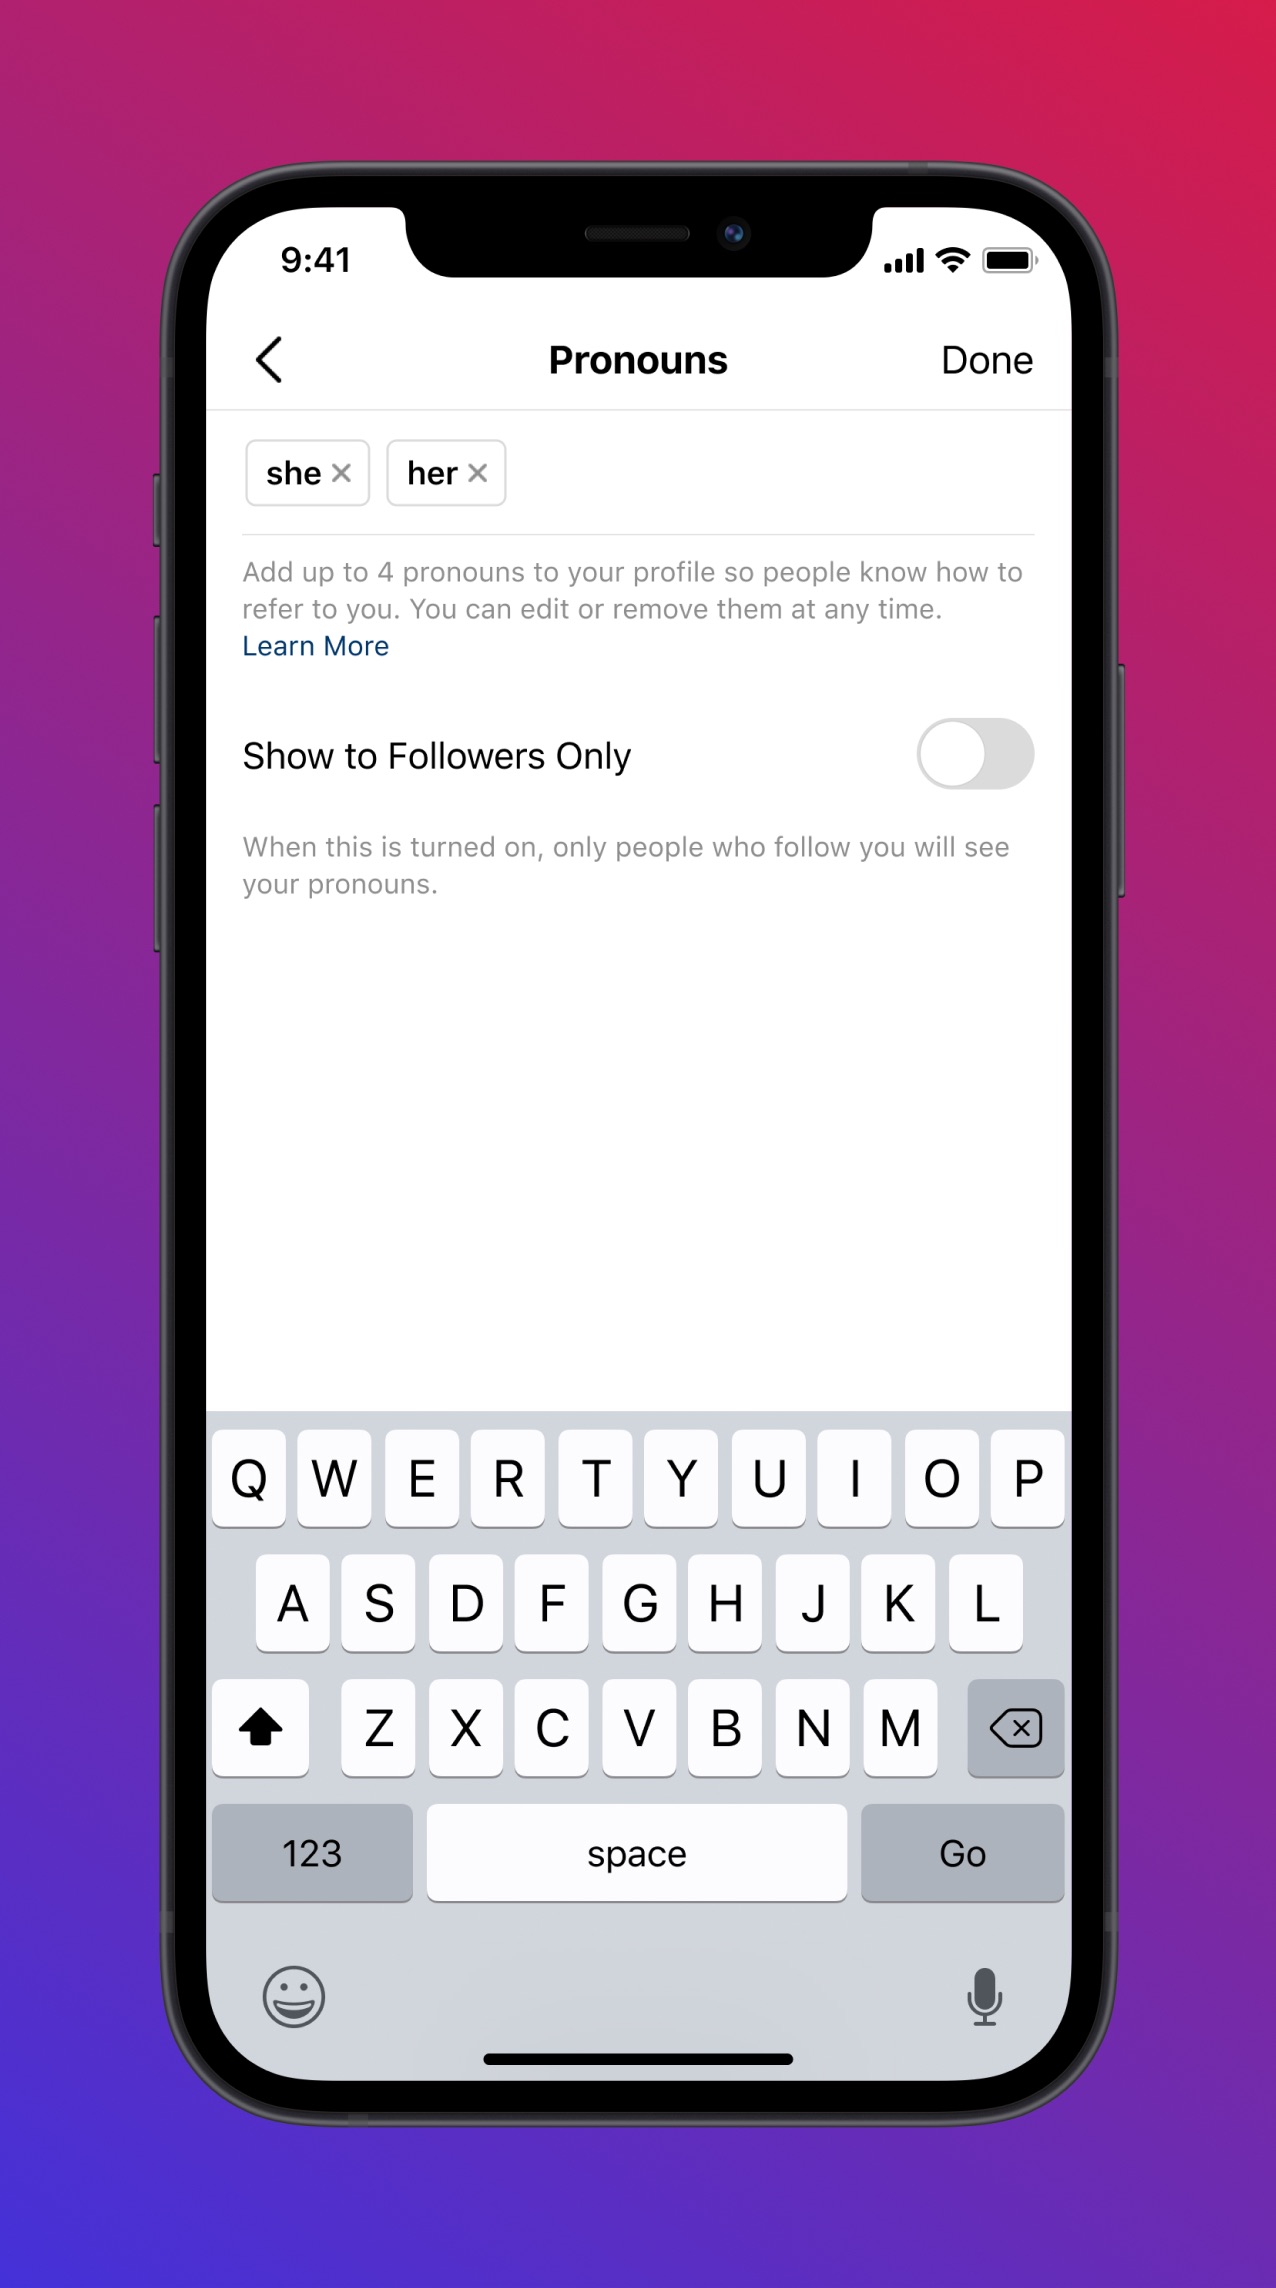 An image showing how to restrict pronouns on your Instagram profile to followers only on iPhone